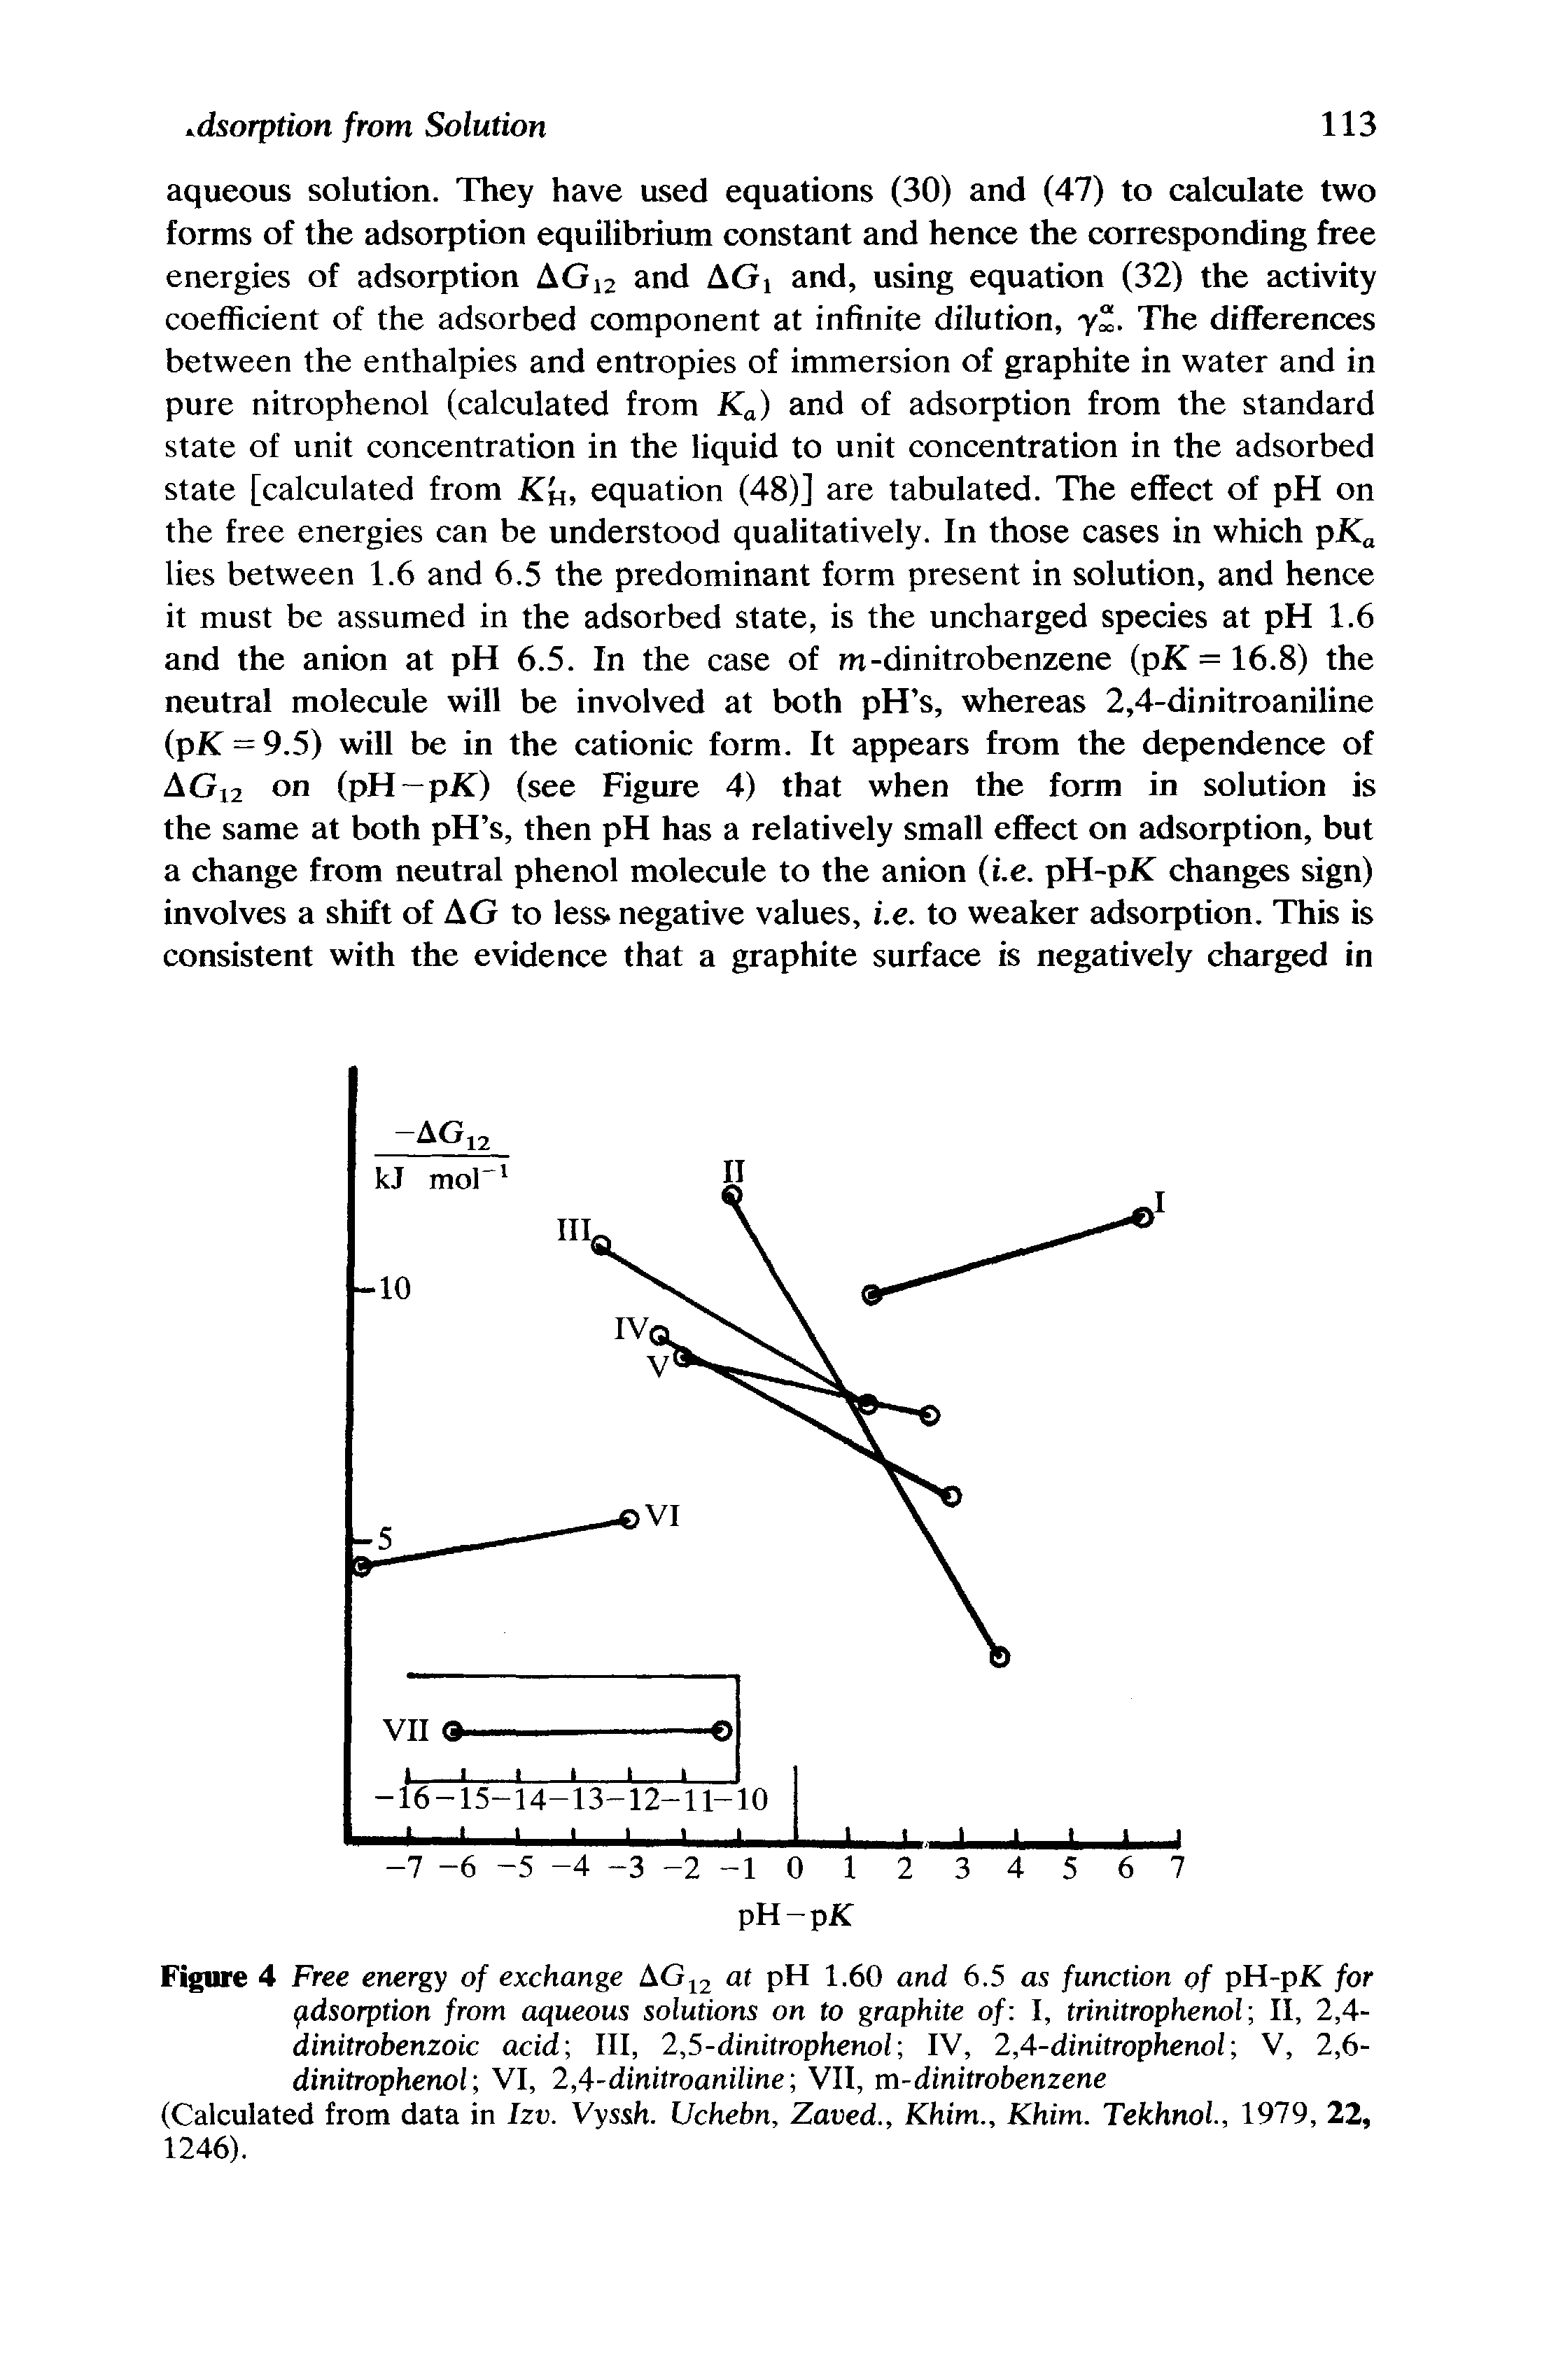 Figure 4 Free energy of exchange AG 2 at pH 1.60 and 6.5 as function of pH-pK for fidsorption from aqueous solutions on to graphite of I, trinitrophenol II, 2,4-dinitrobenzoic acid III, 2,5-dinitrophenol IV, 2,4-dinitrophenol V, 2,6-dinitrophenol VI, 2,4-dinitroaniline VII, m-dinitrobenzene (Calculated from data in Izv. Vyssh. Uchebn, Zaved., Khim., Khim. Tekhnoi, 1979, 22, 1246).